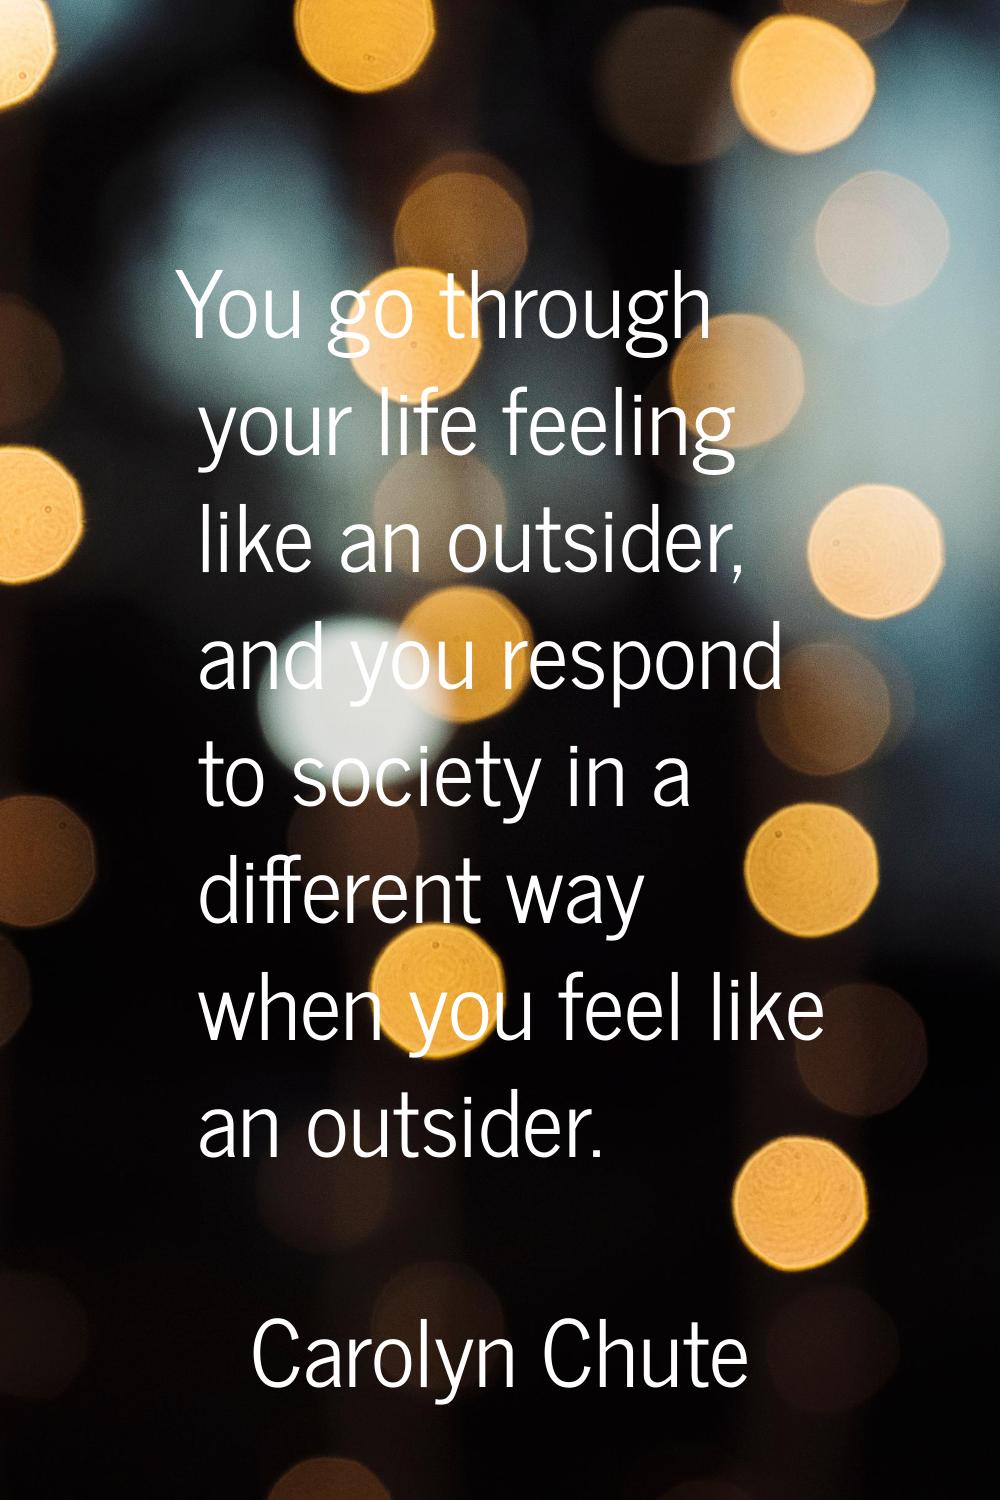 You go through your life feeling like an outsider, and you respond to society in a different way wh